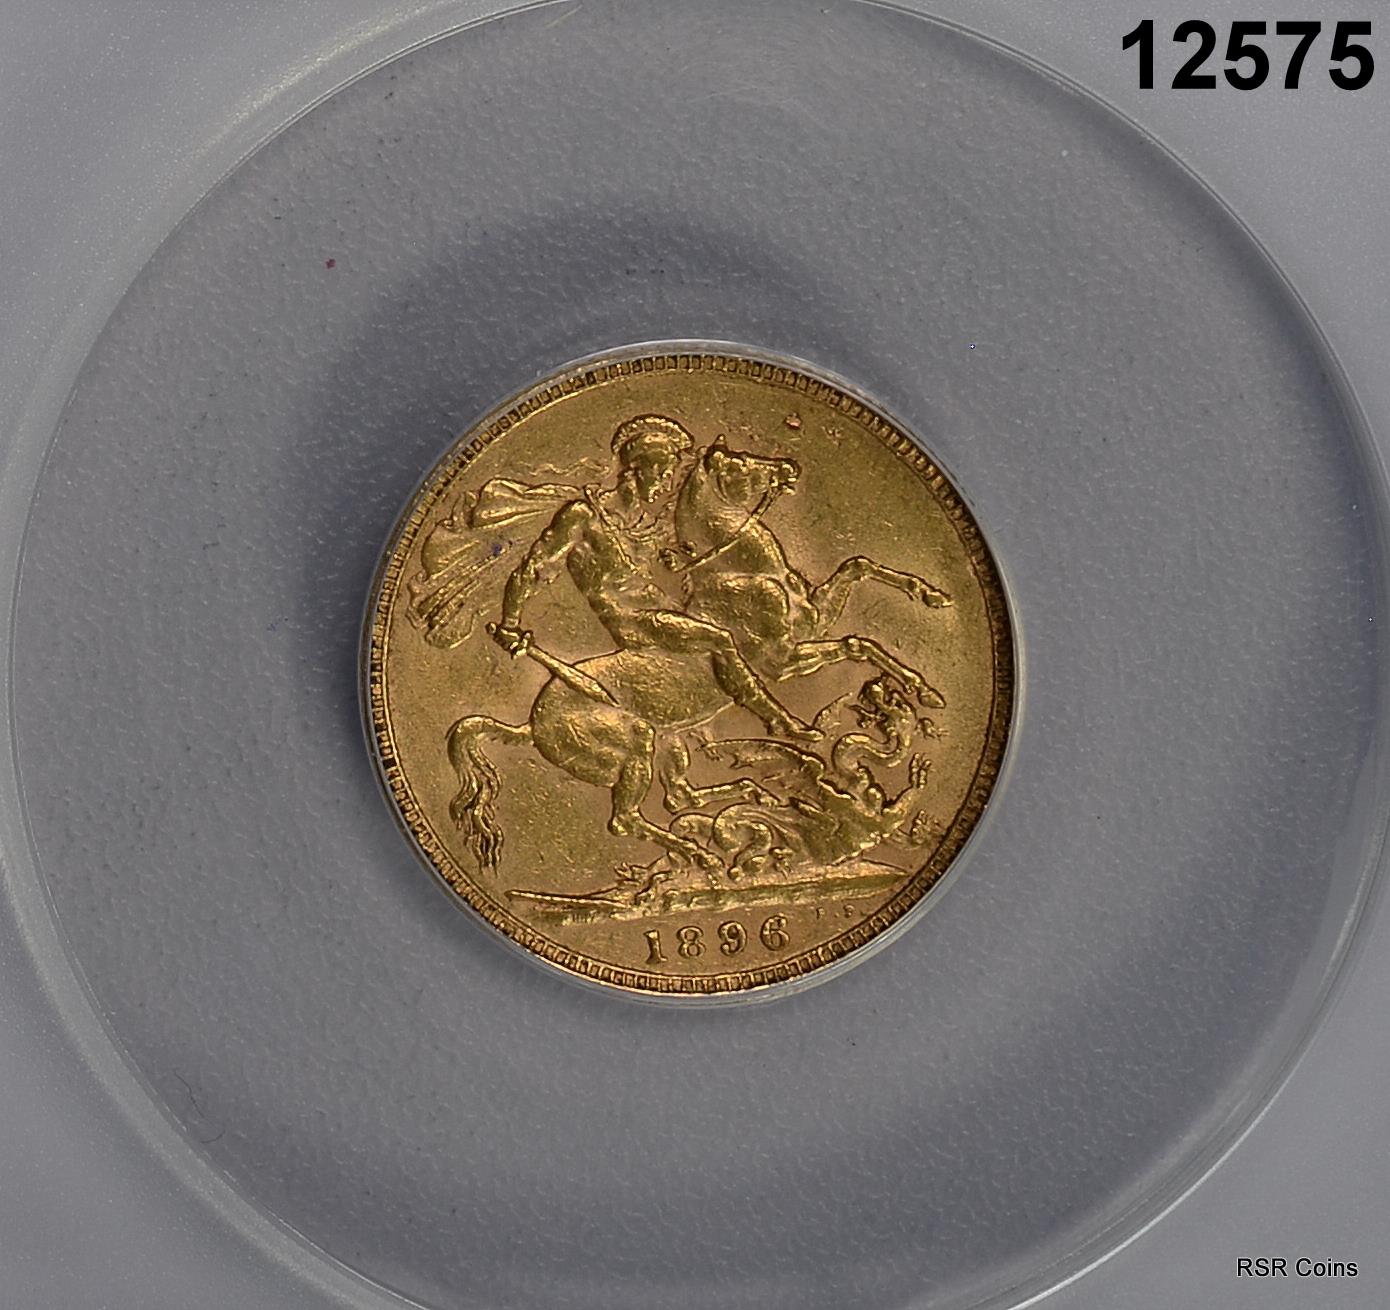 1896 GREAT BRITAIN GOLD SOVEREIGN ANACS CERTIFIED AU53! #12575